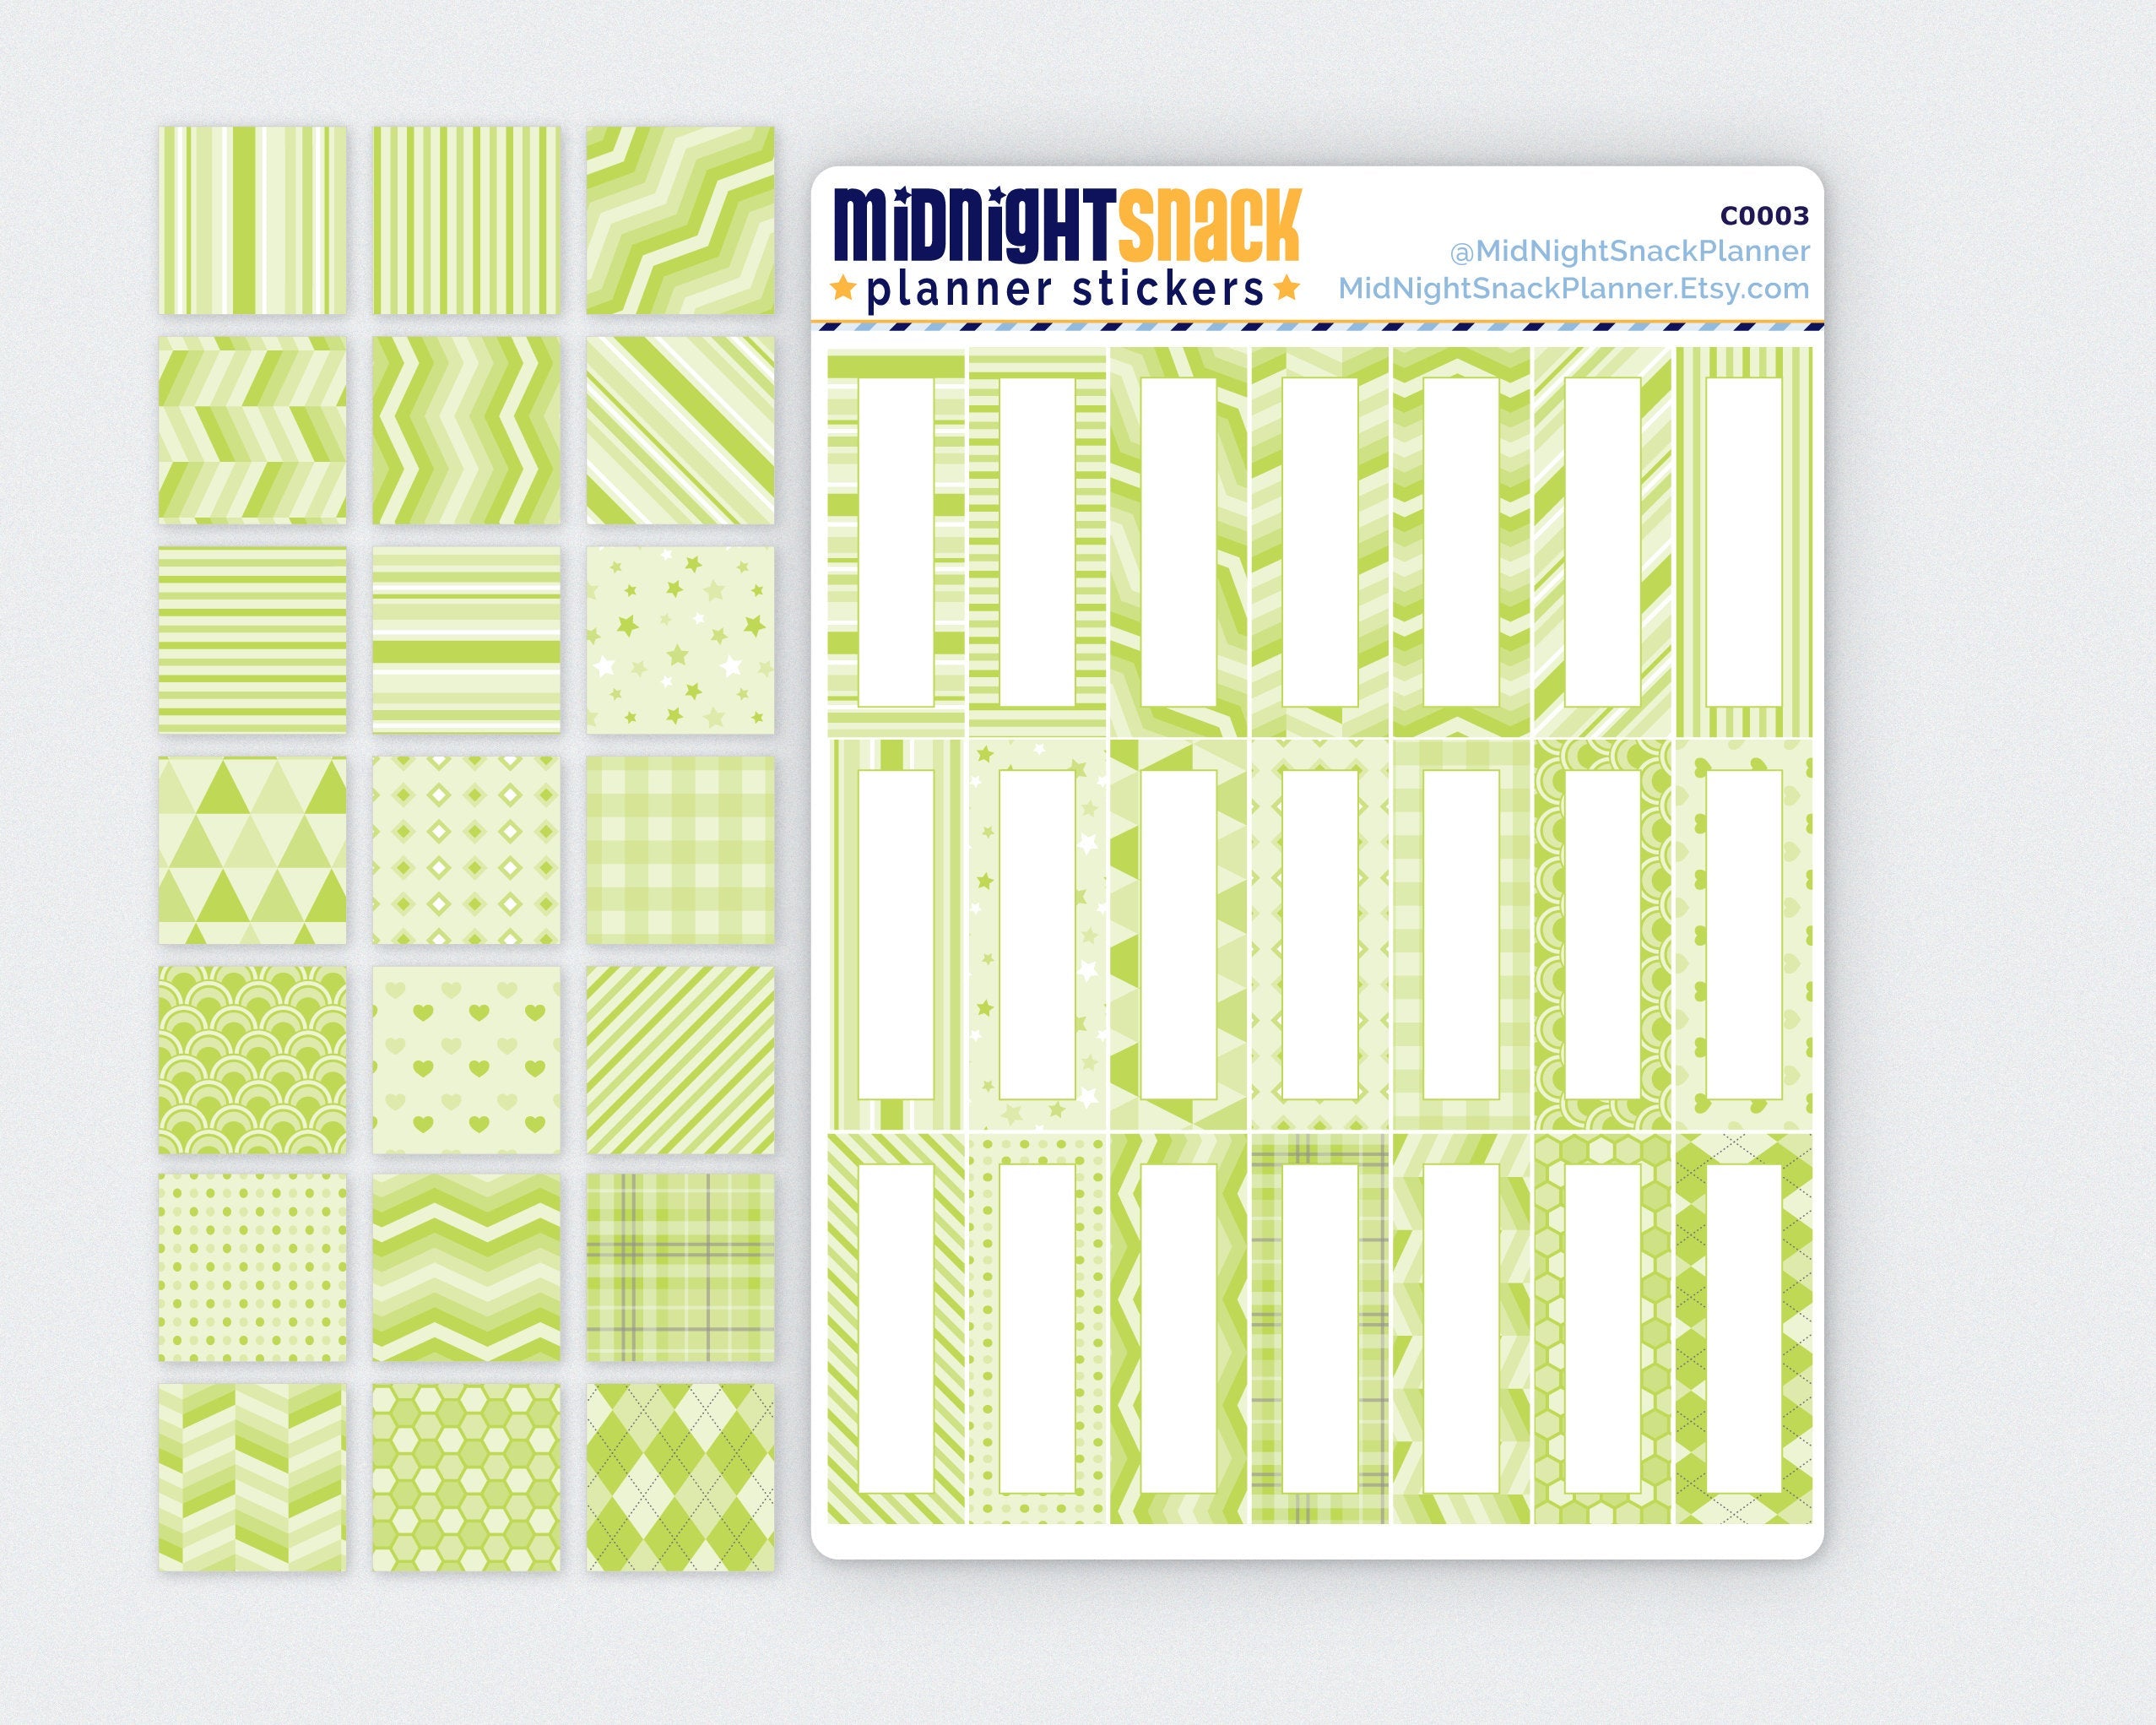 Green Patterned Quarter Boxes Planner Stickers Midnight Snack Planner